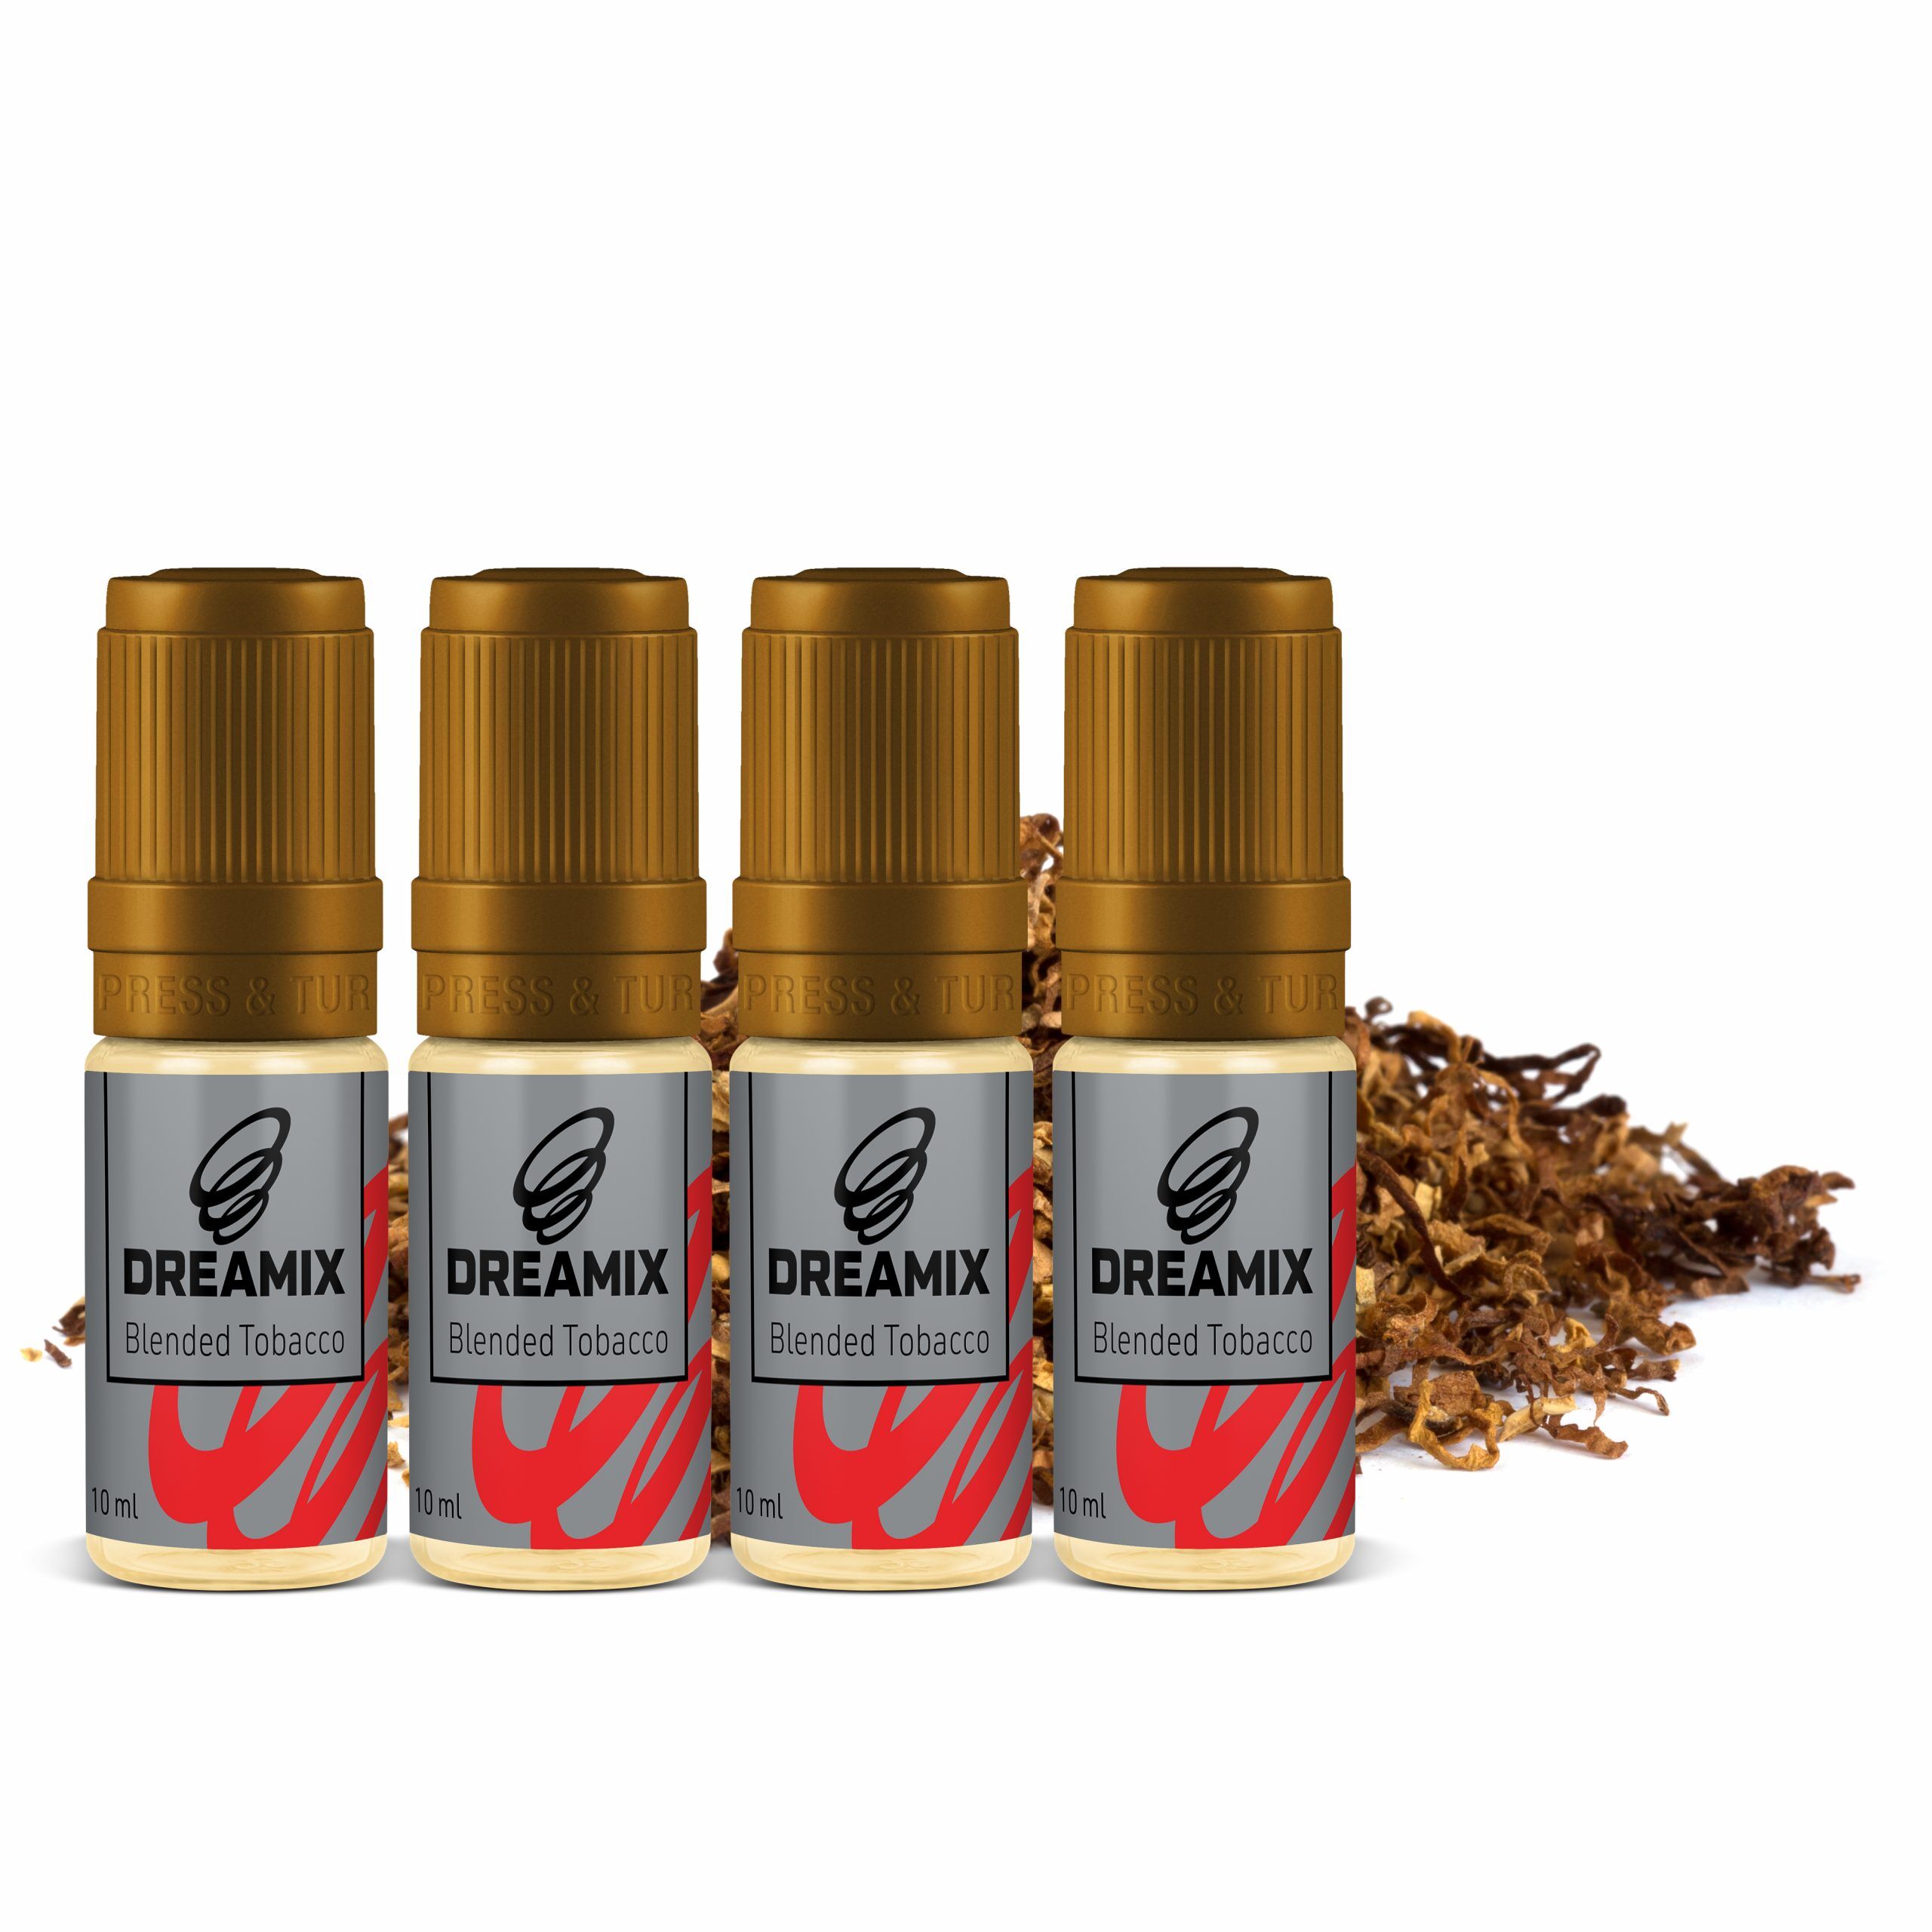 Dreamix Blanded tobacco